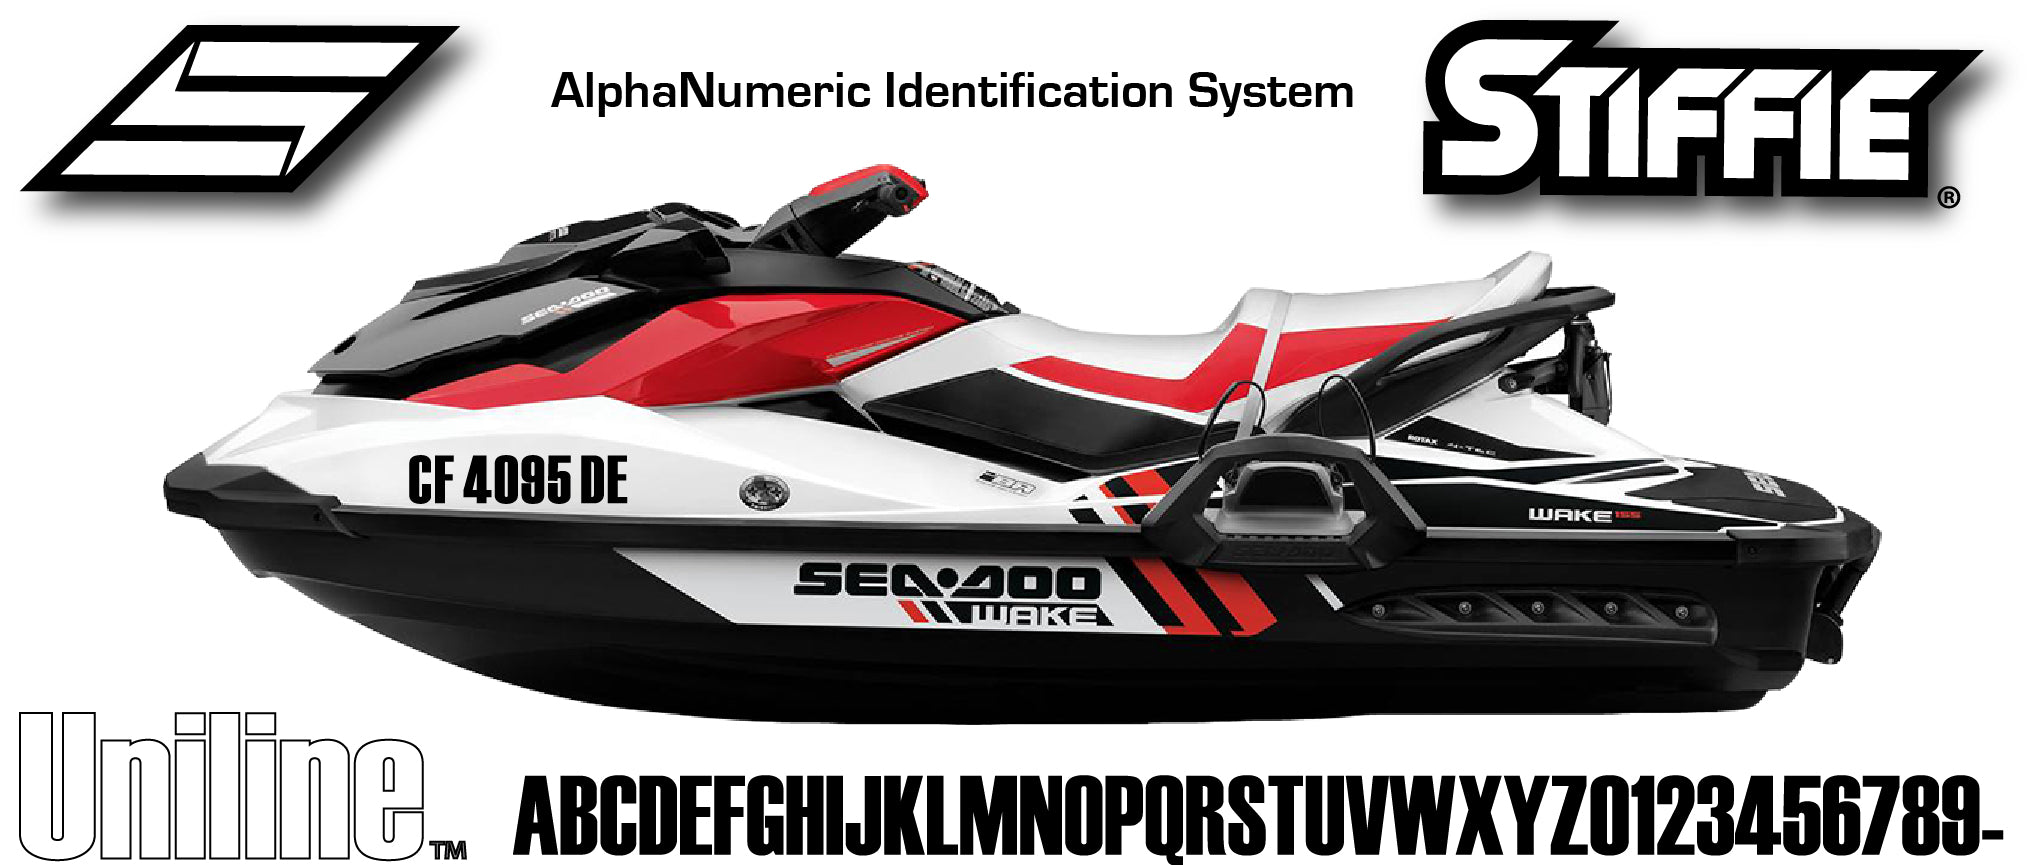 STIFFIE Uniline Gold Rush 3" ID Kit Alpha-Numeric Registration Identification Numbers Stickers Decals for Boats & Personal Watercraft